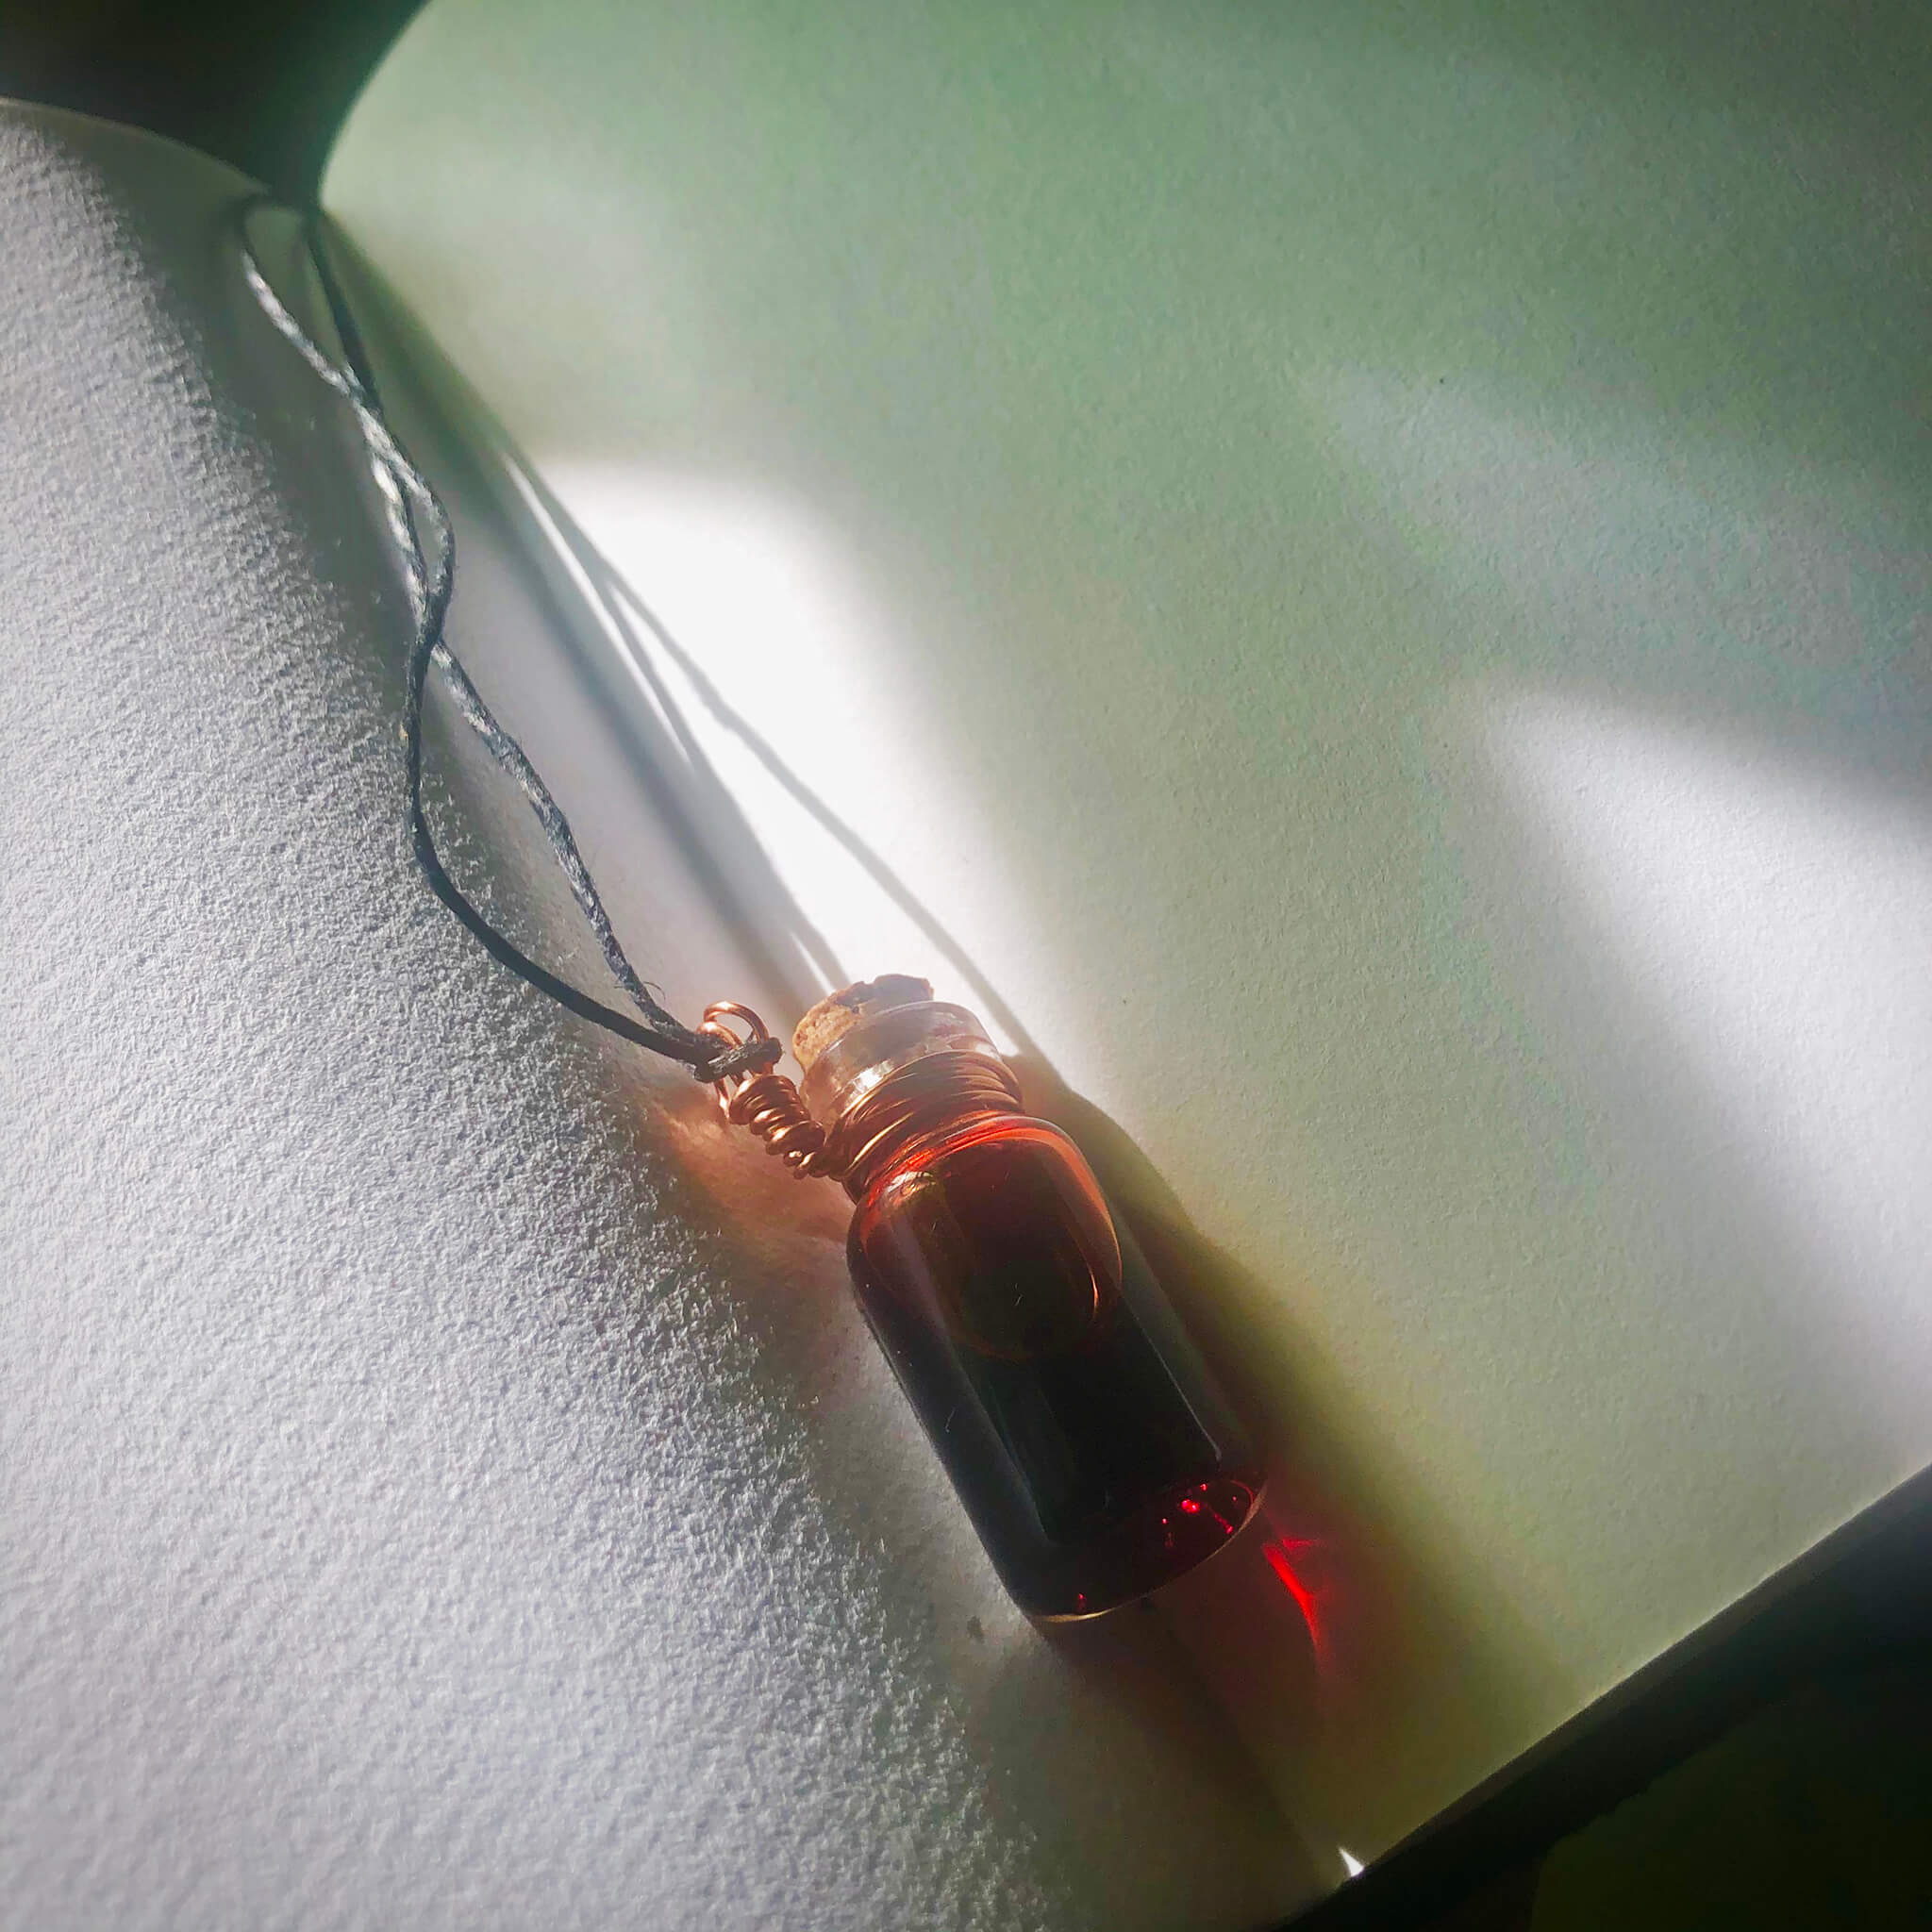 Buy Blood Necklace Blood Vial Necklace Blood Gifts Til Death Do Us Part  Valentine Gift for Him Couples Gifts Bullet Casing Jewelry Online in India  - Etsy